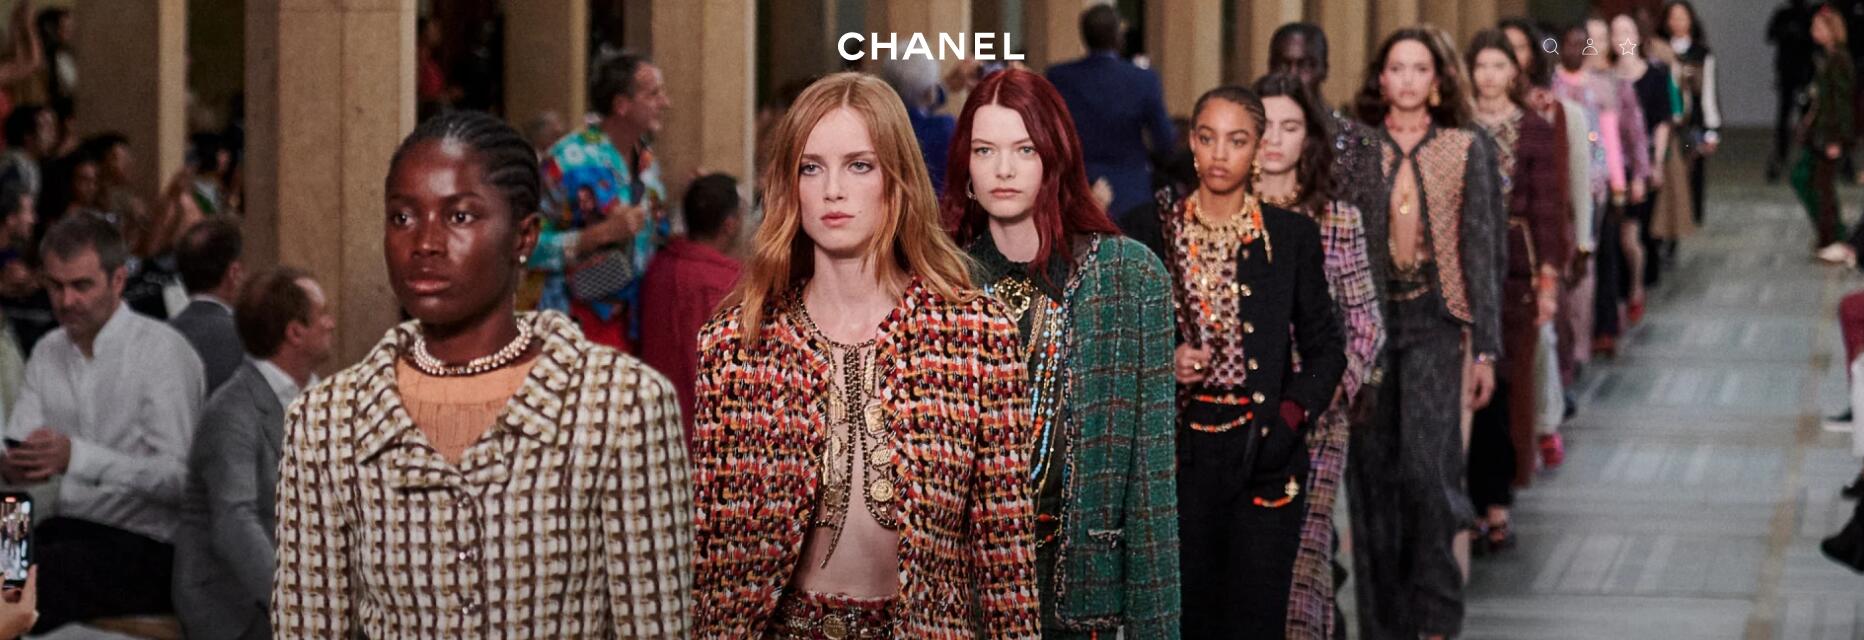 Why does Chanel Call Themselves “Half-Italian”?